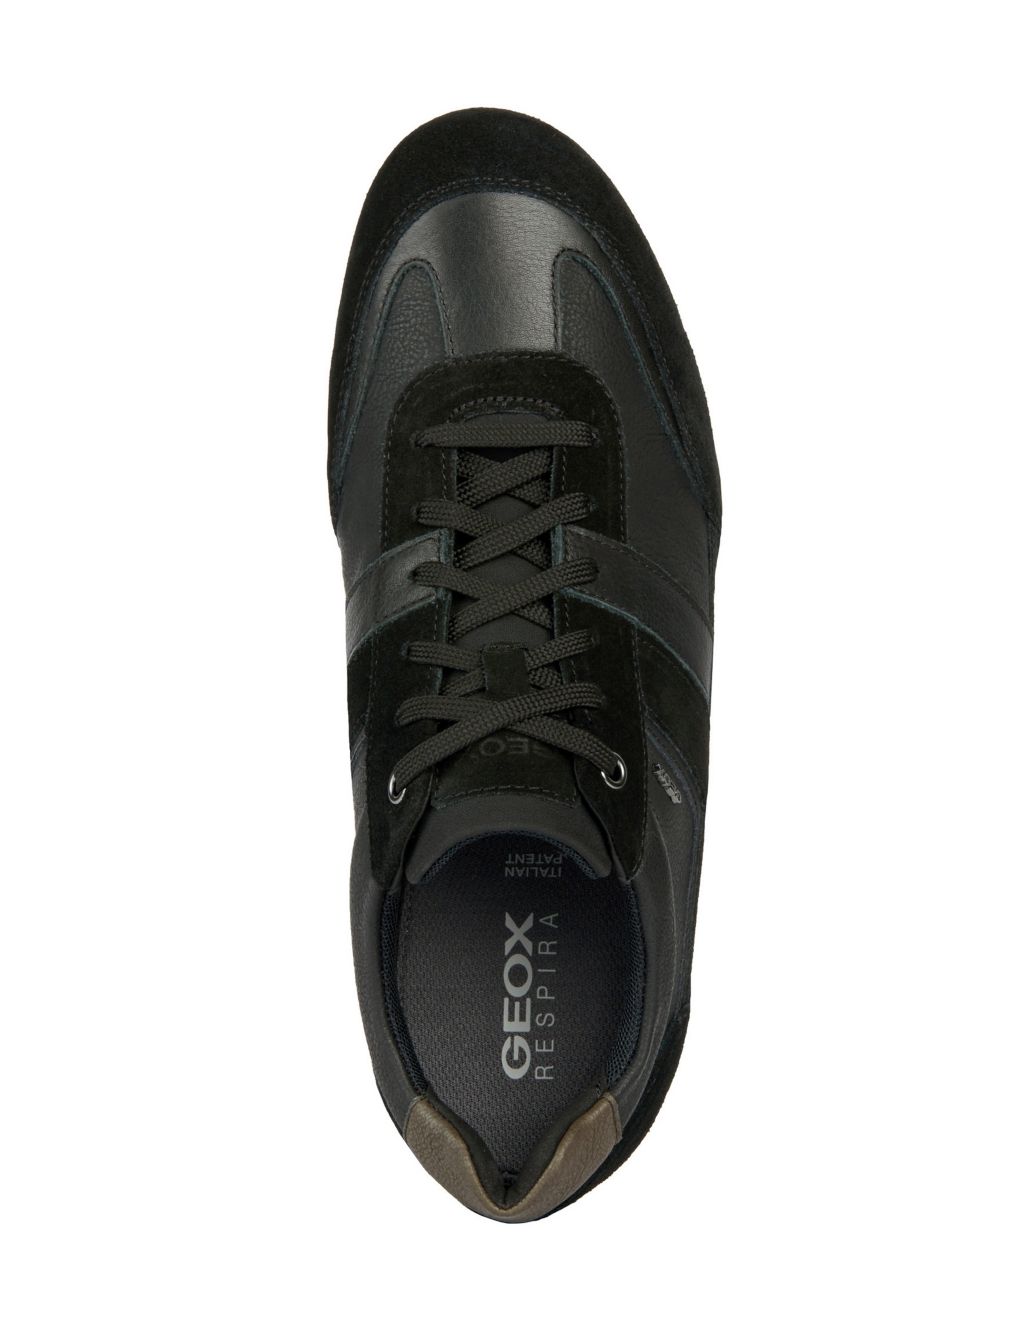 Leather & Suede Lace Up Trainers image 5